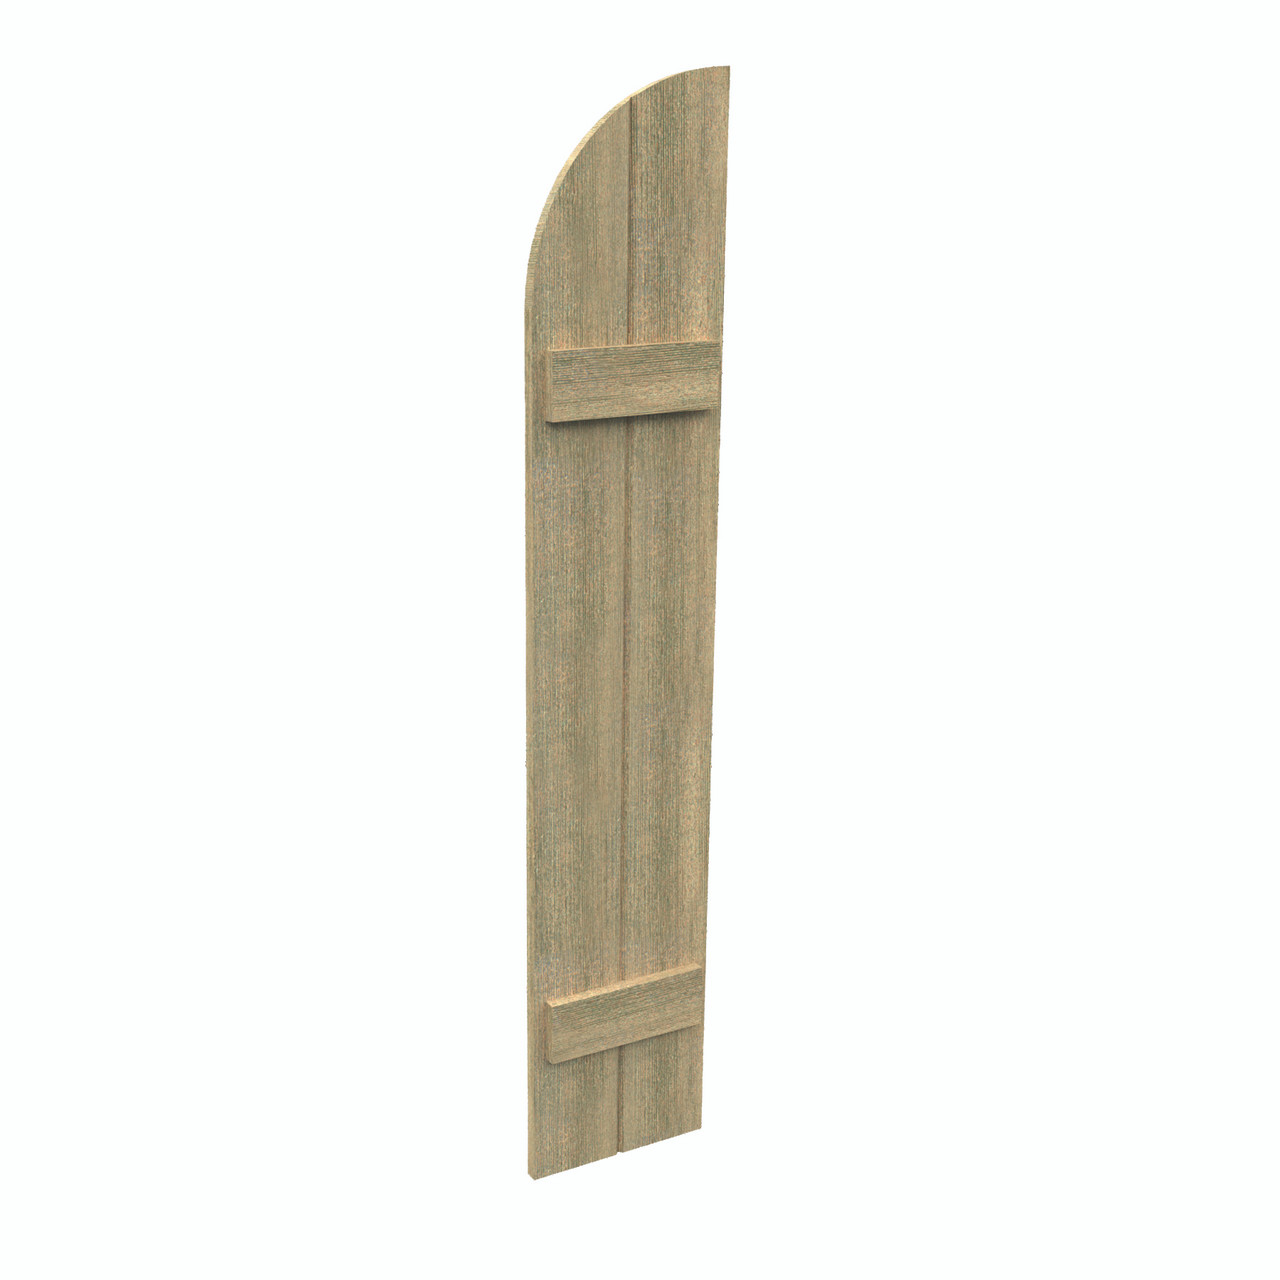 12 inch by 52 inch Quarter Round Shutter with 2-Boards